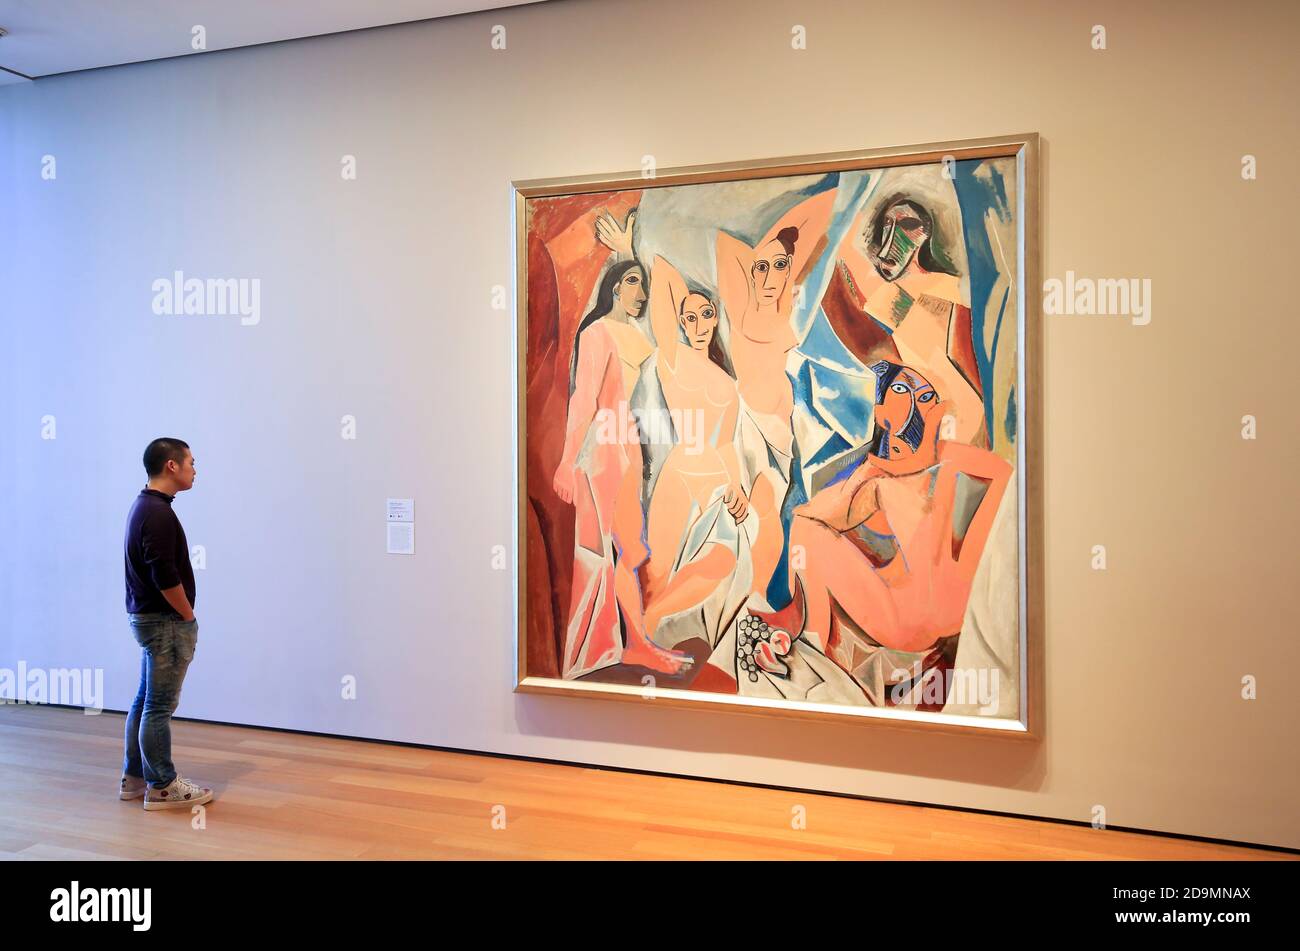 New York City, New York, United States of America - New York City Museum of Modern Art, MOMA, Les Demoiselles d'Avignon (The Young Ladies of Avignon, and originally titled The Brothel of Avignon) by Pablo Picasso (1907), USA , Manhattan. Stock Photo